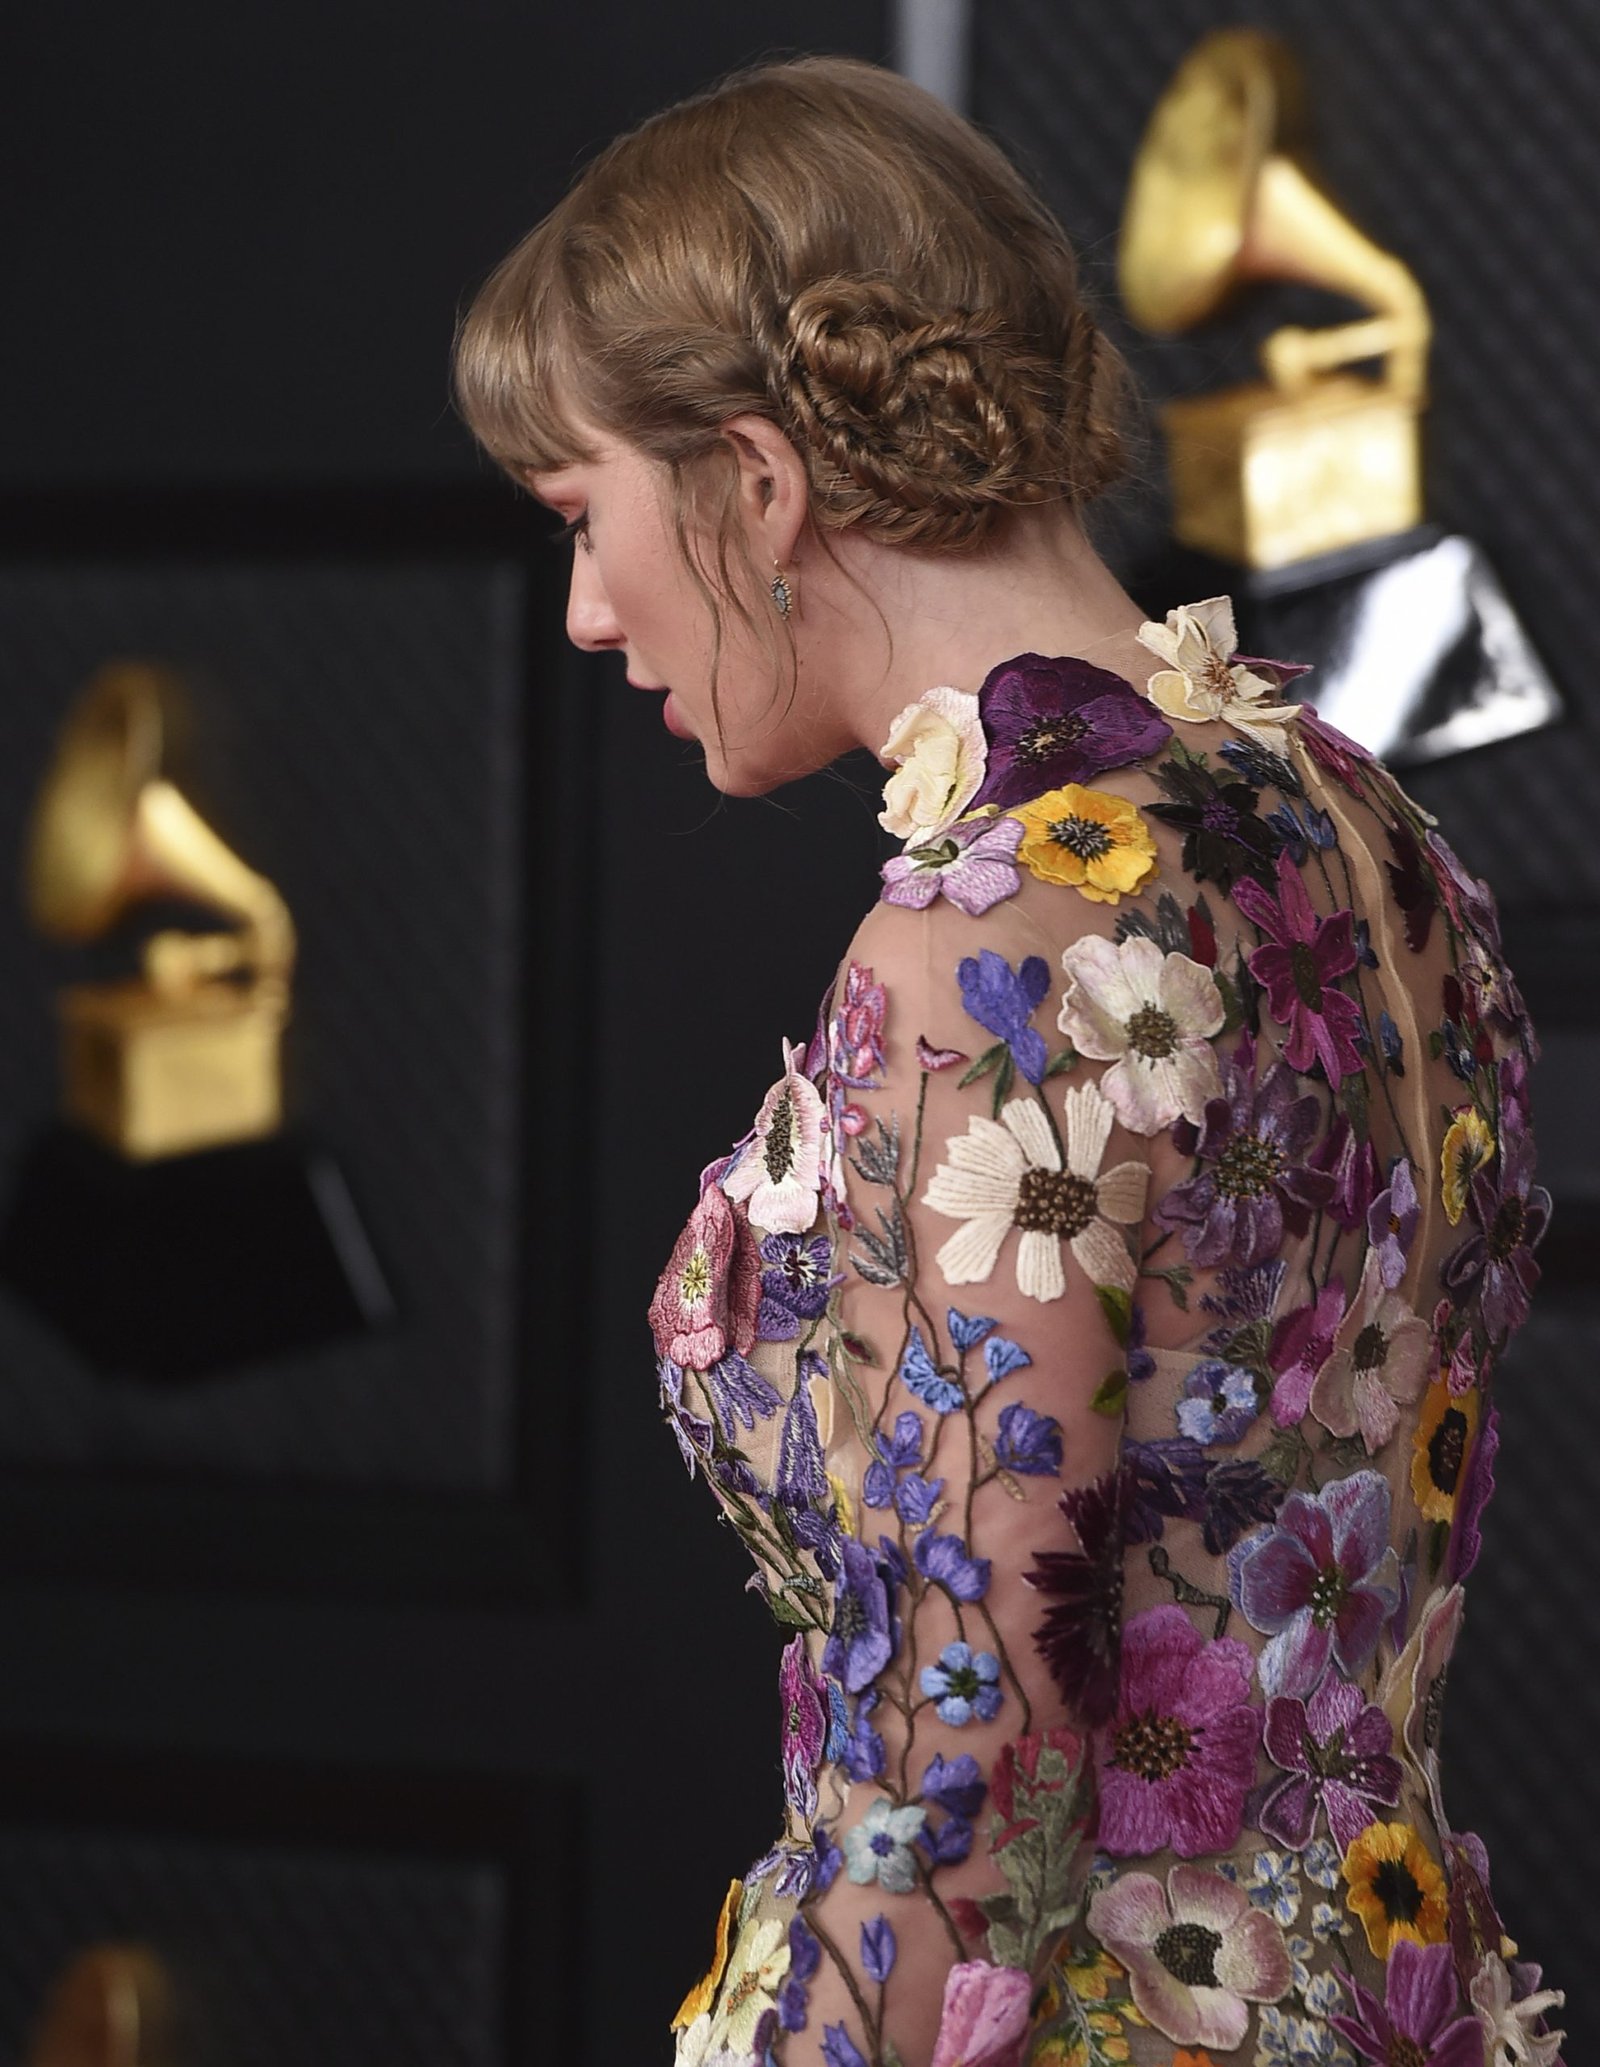 If You Think Taylor Swift’s Grammys Hair Looks Pretty From The Front, Just Wait Until You See The Back